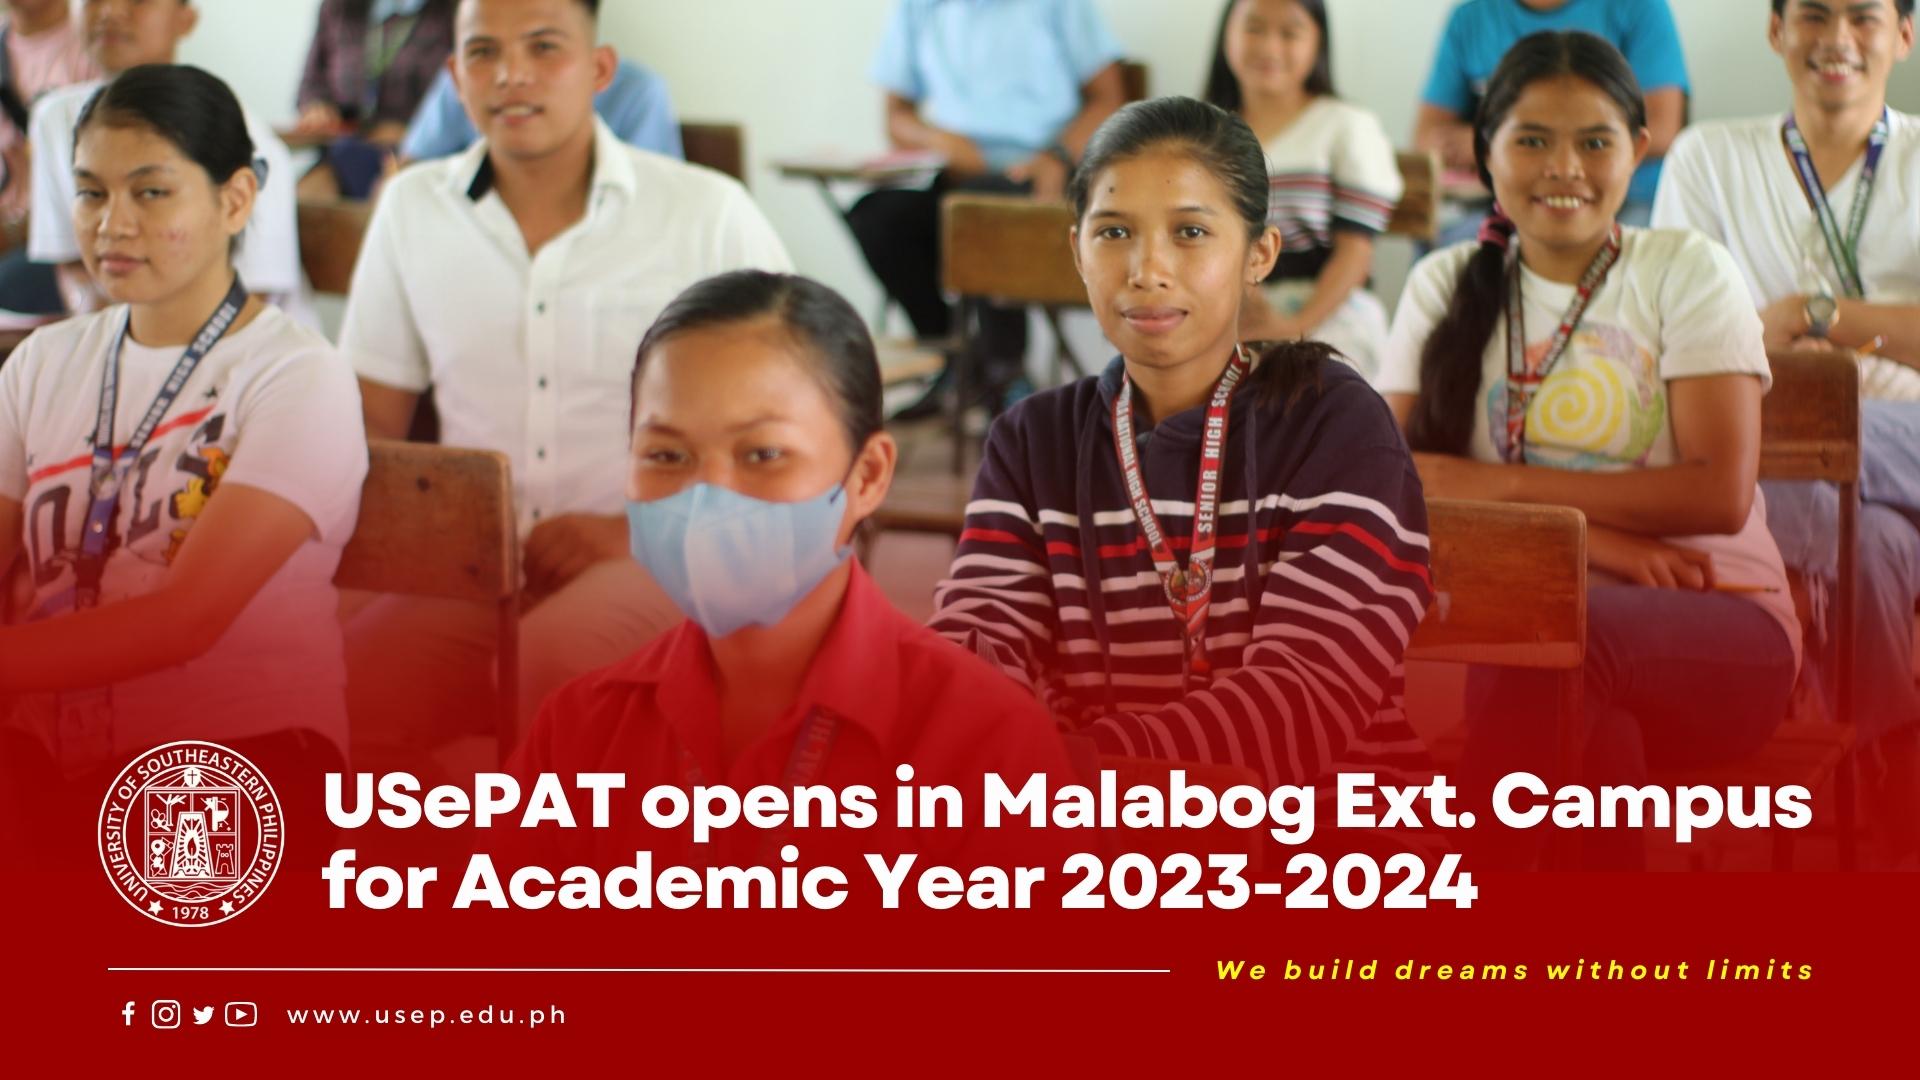 USePAT opens in Malabog Ext. Campus for Academic Year 2023-2024